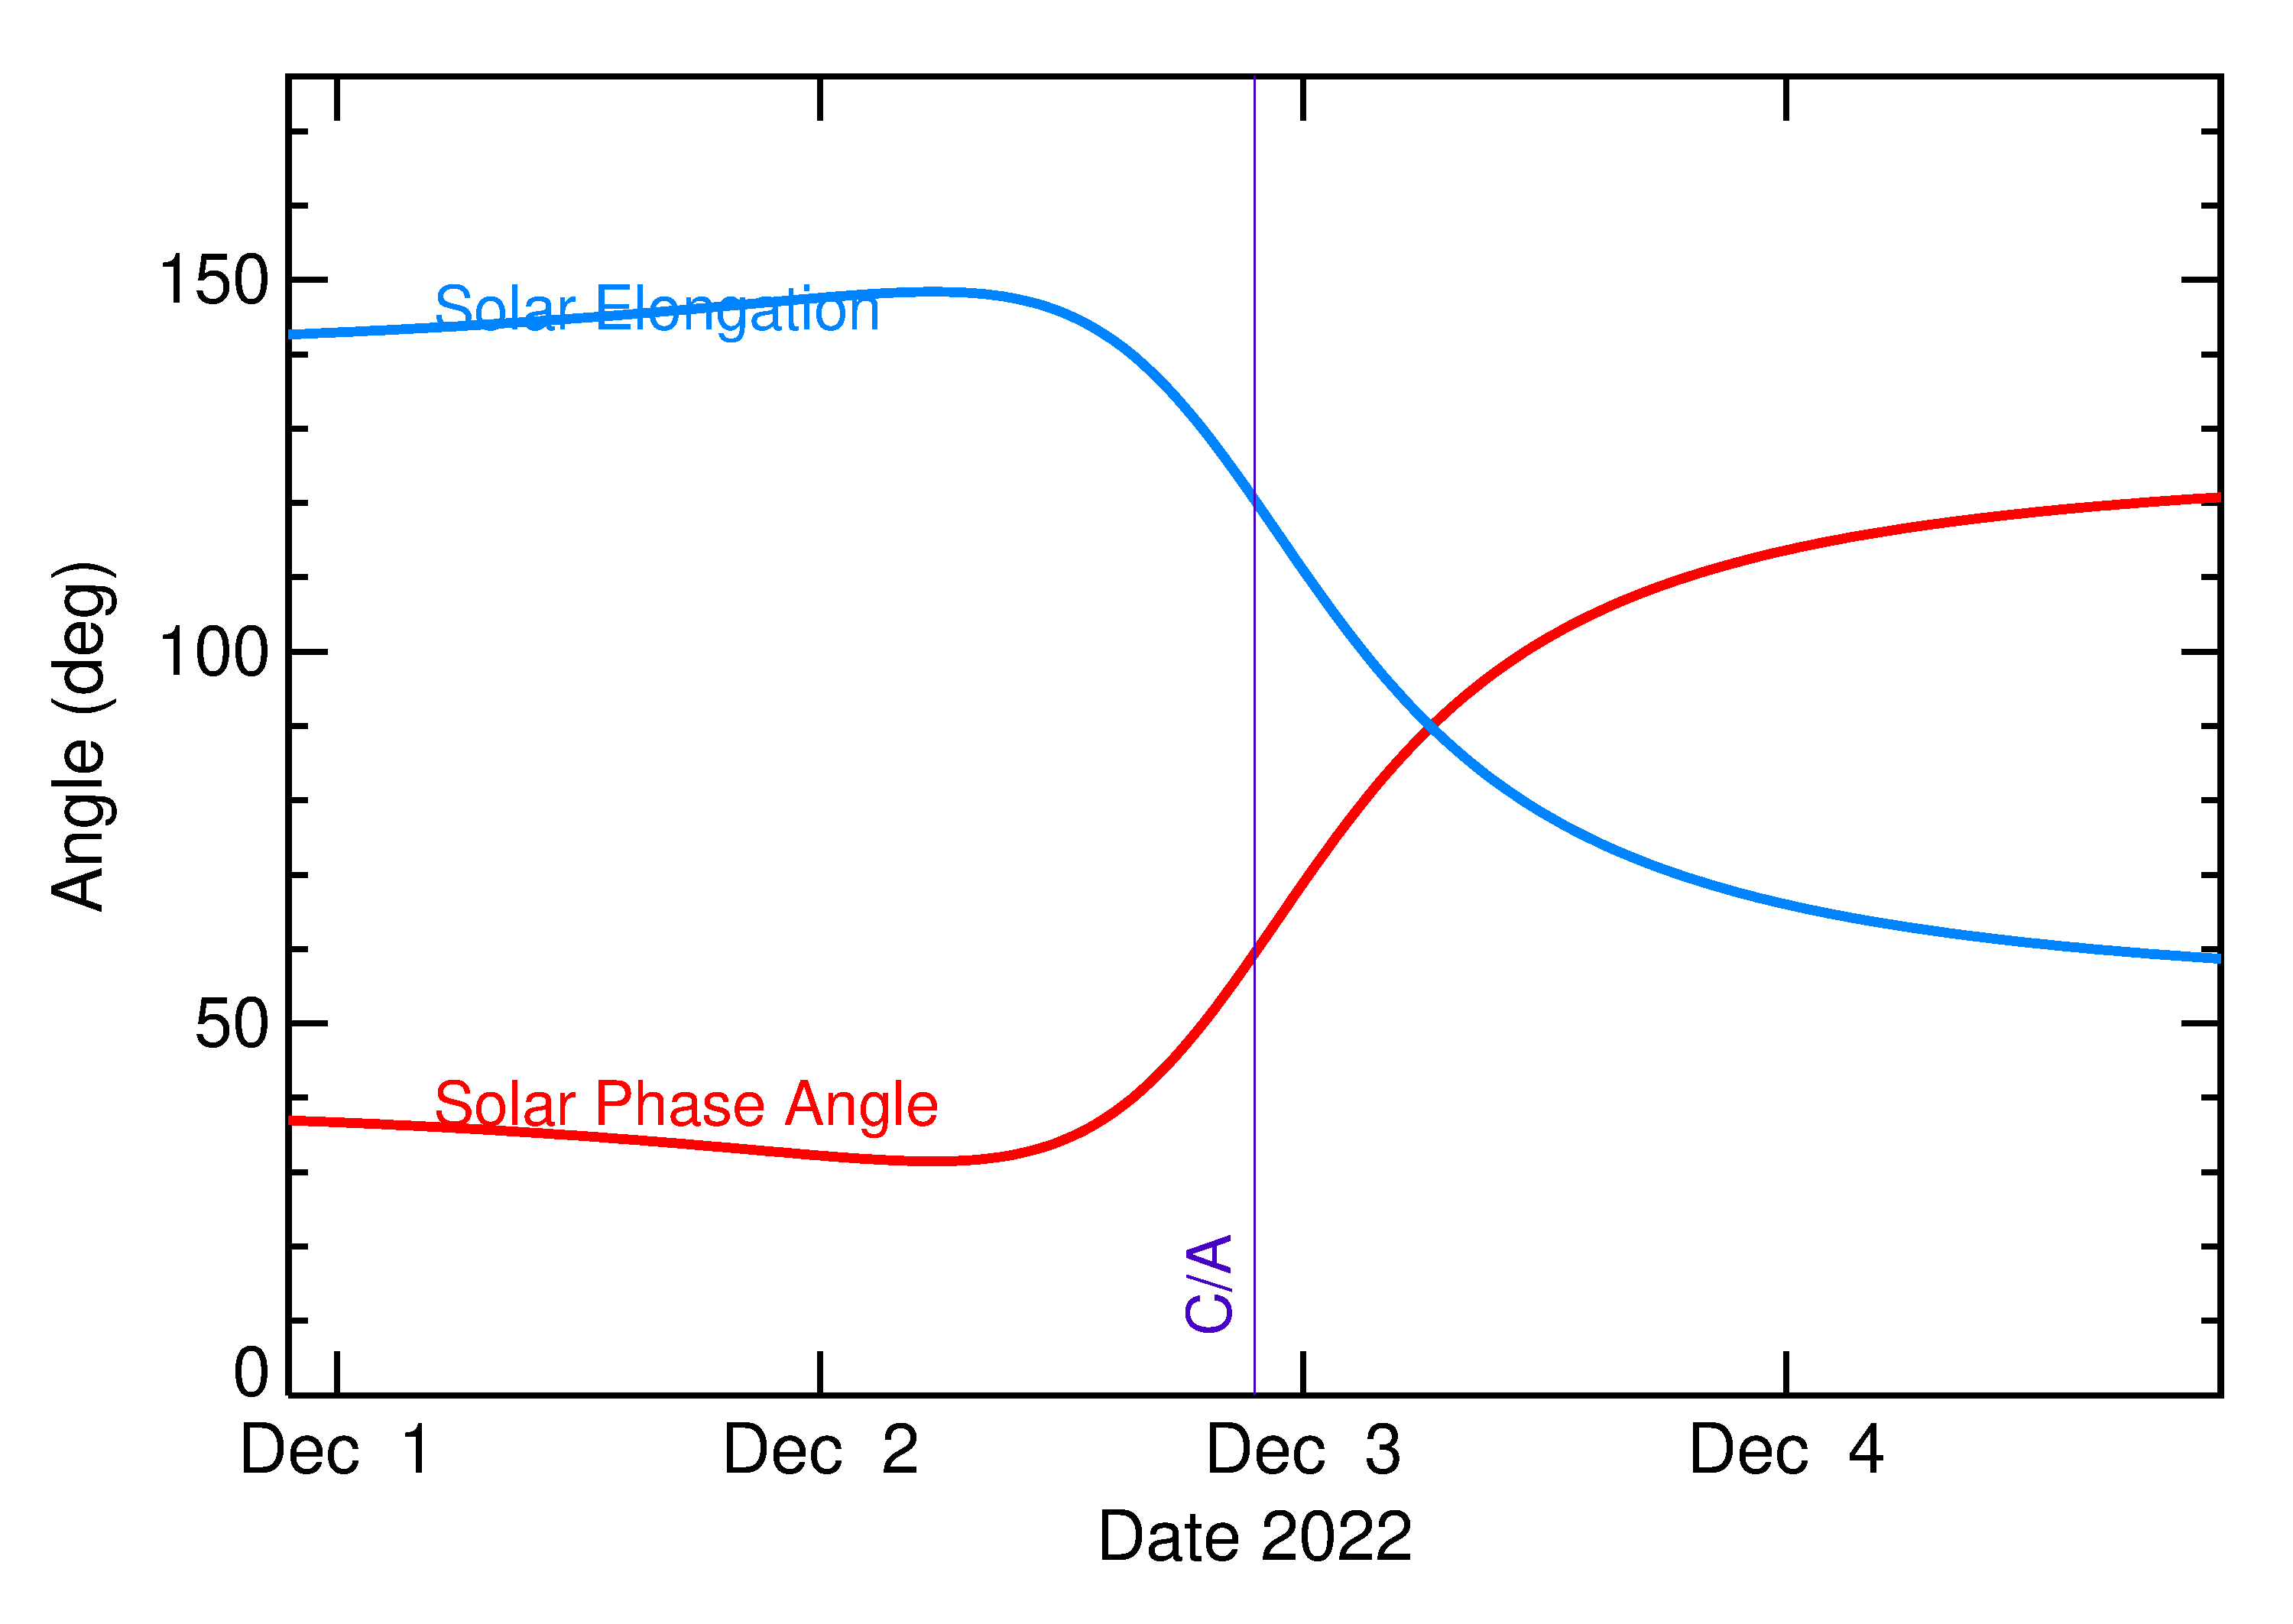 Solar Elongation and Solar Phase Angle of 2022 XB in the days around closest approach